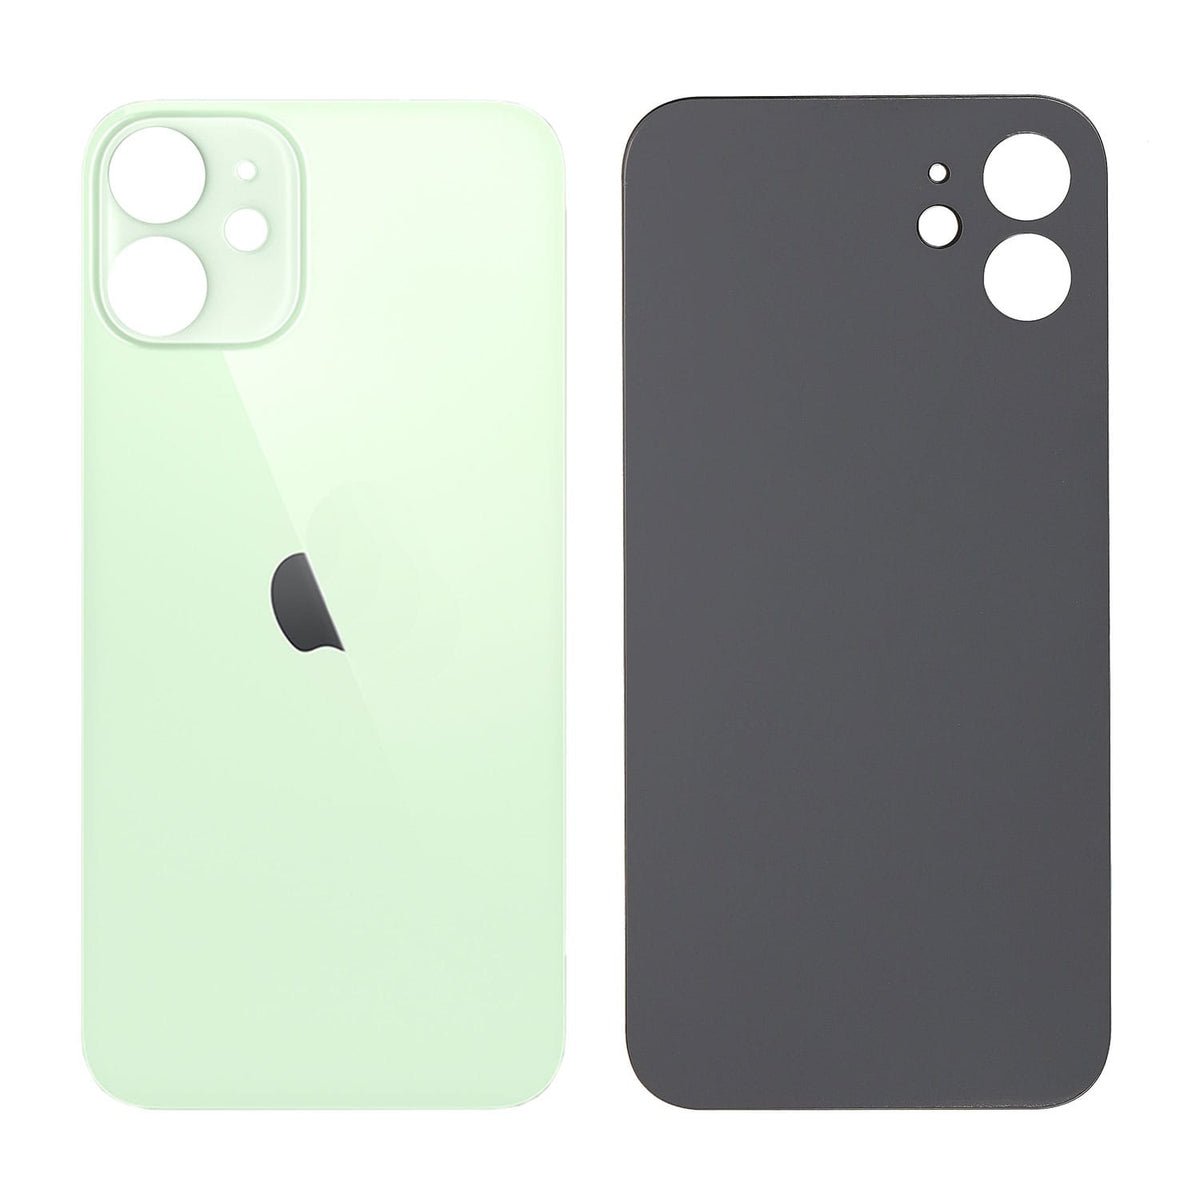 BACK COVER FOR IPHONE 12 - GREEN